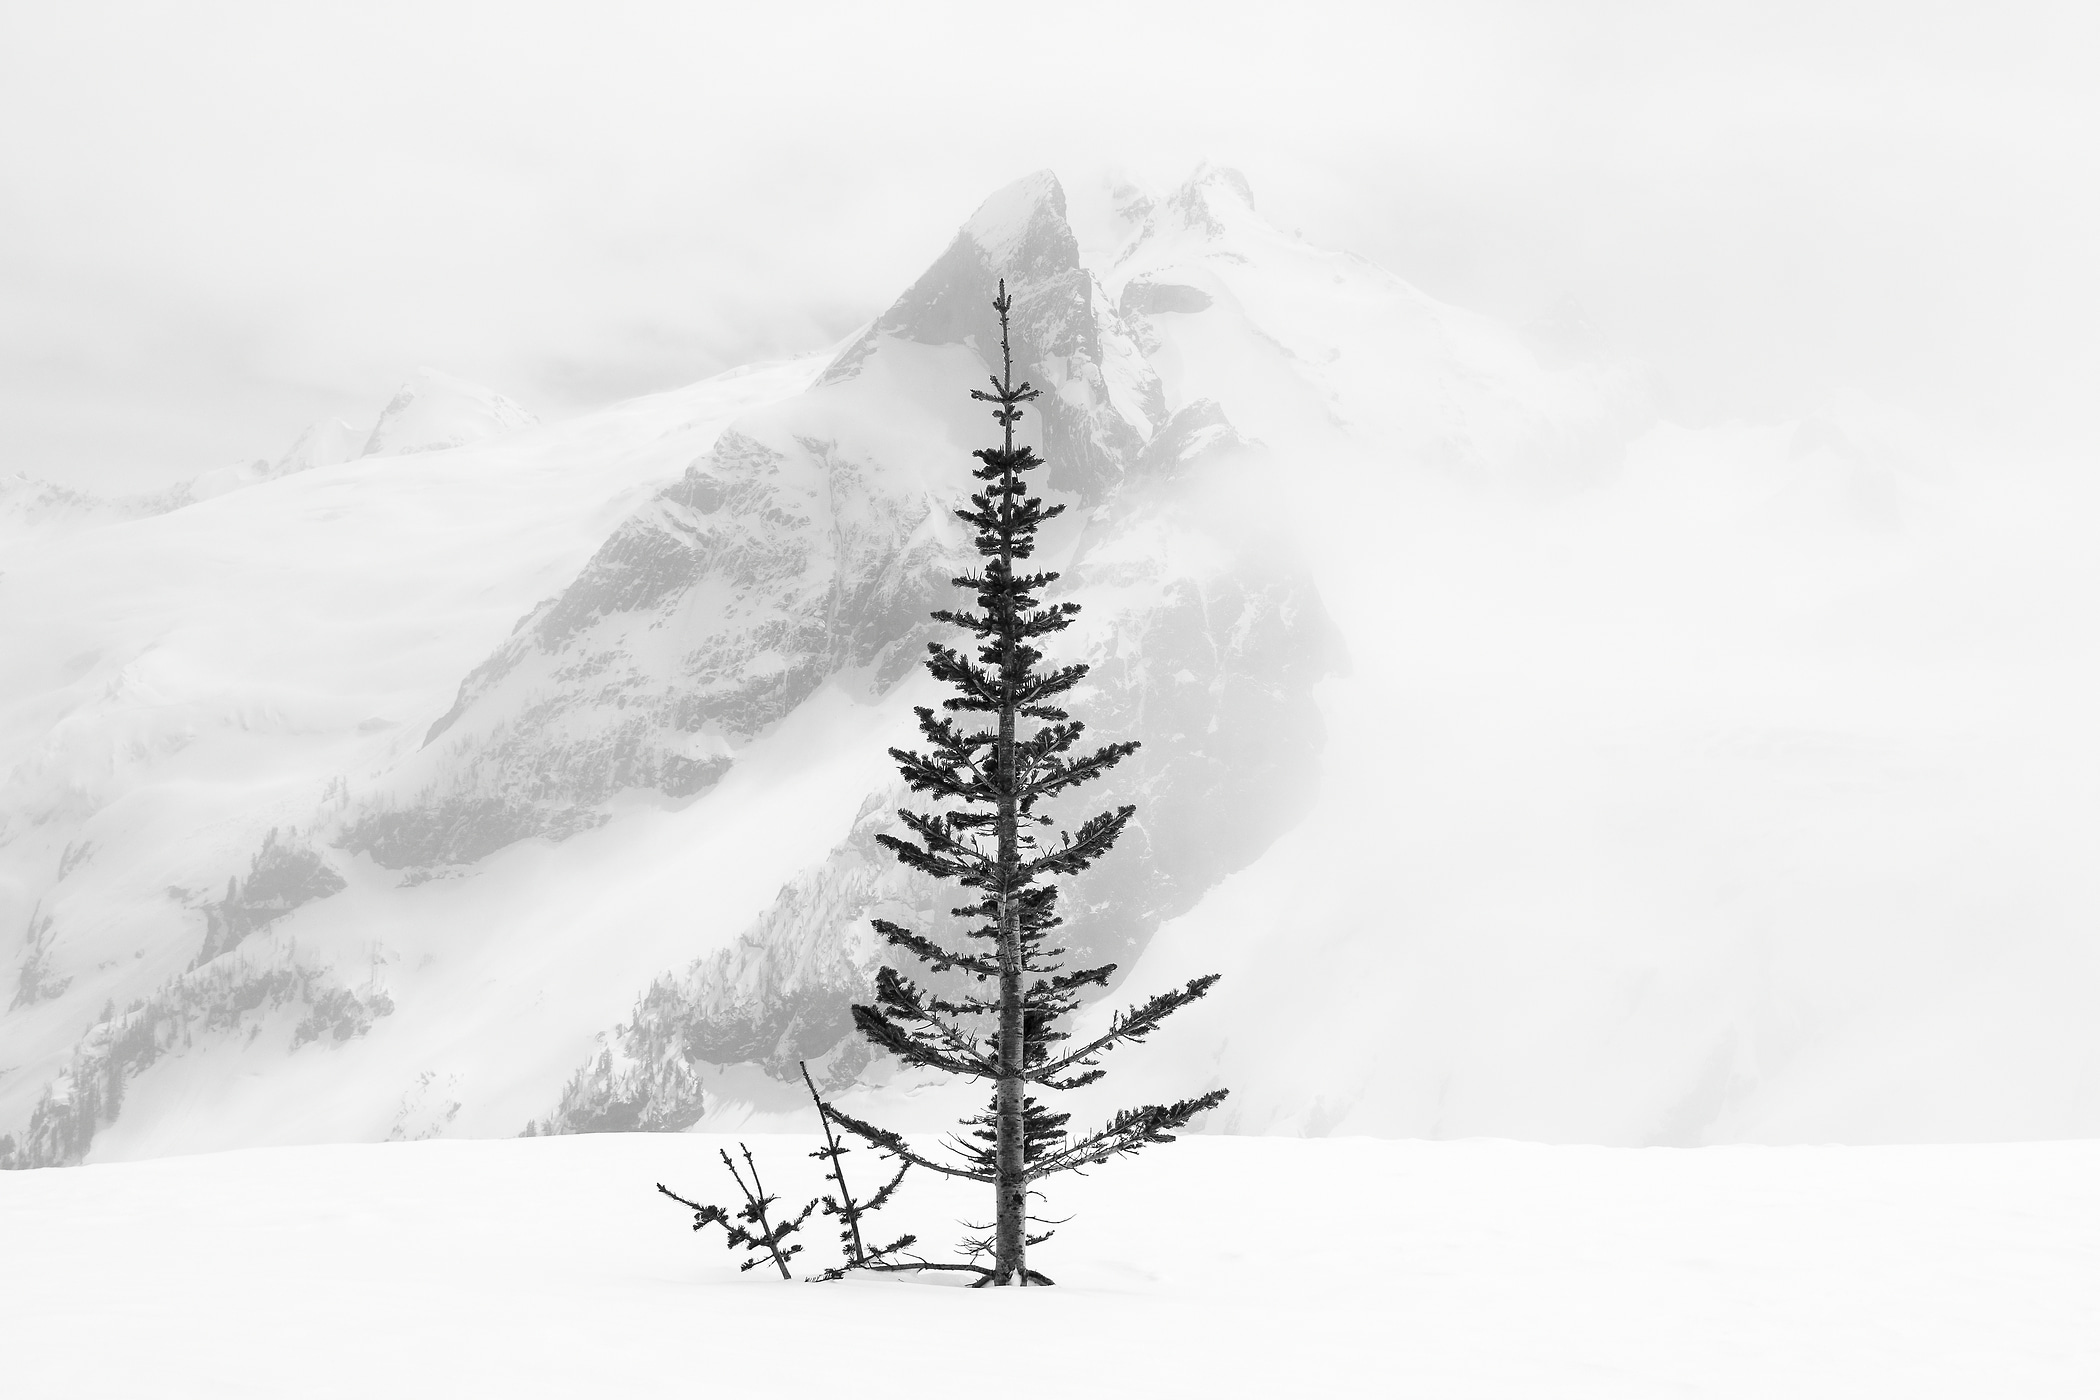 17 megapixels! A very high resolution, large-format VAST photo print of a lone tree in snow in front of a mountain; black and white photograph created by Scott Rinckenberger in Dome Peak, Glacier Peak Wilderness, Washington